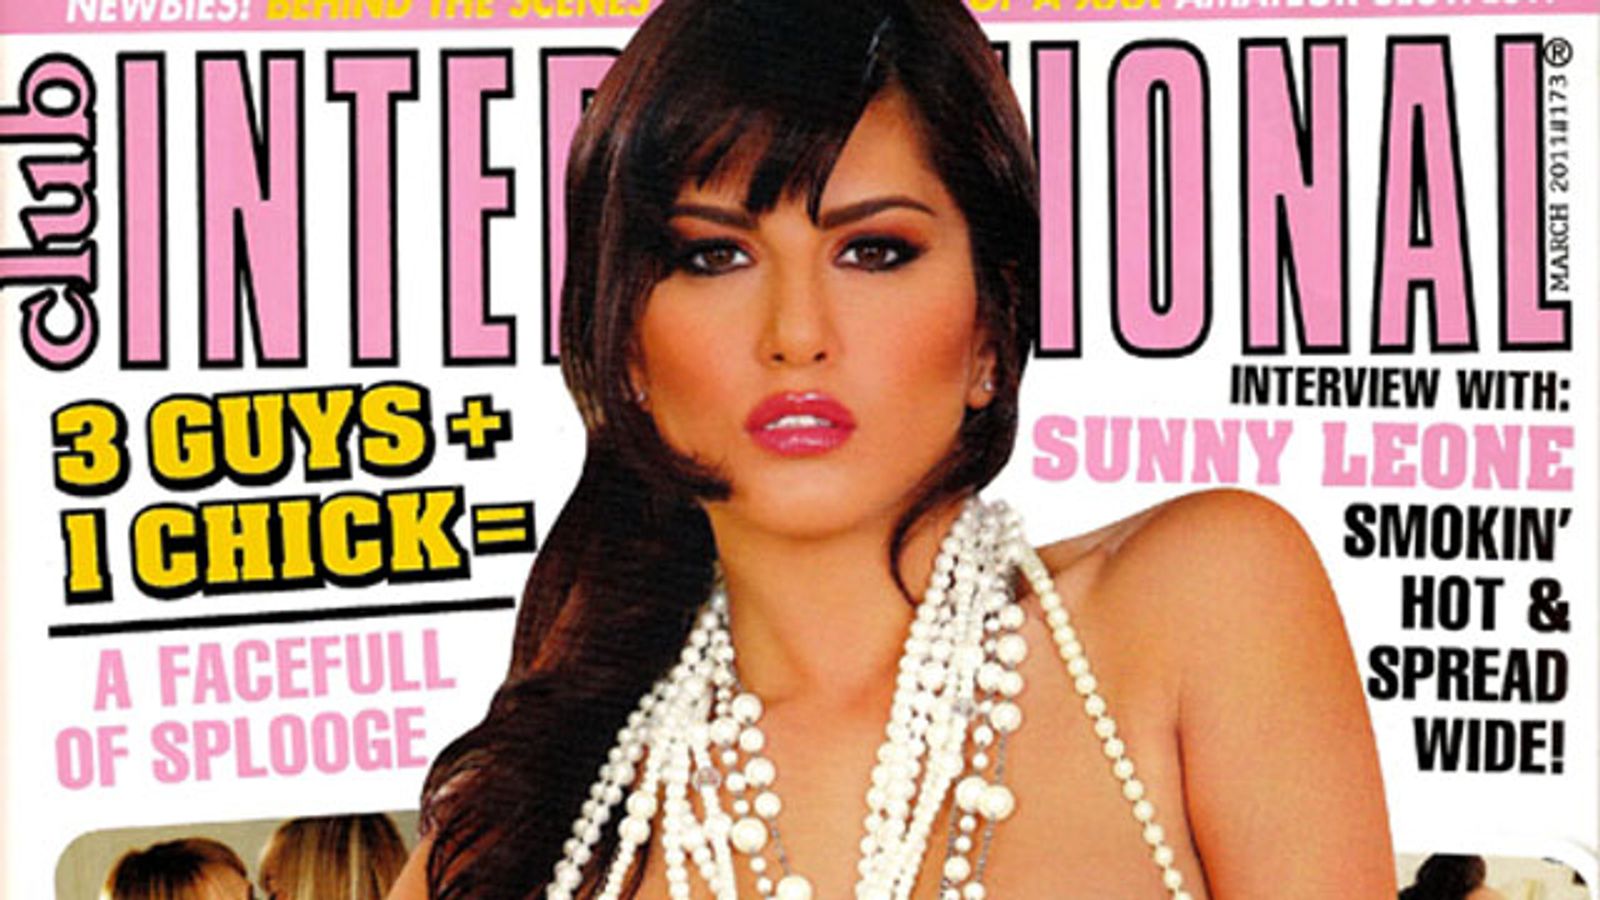 Miles Long Shoots Sunny Leone for March ‘Club International’